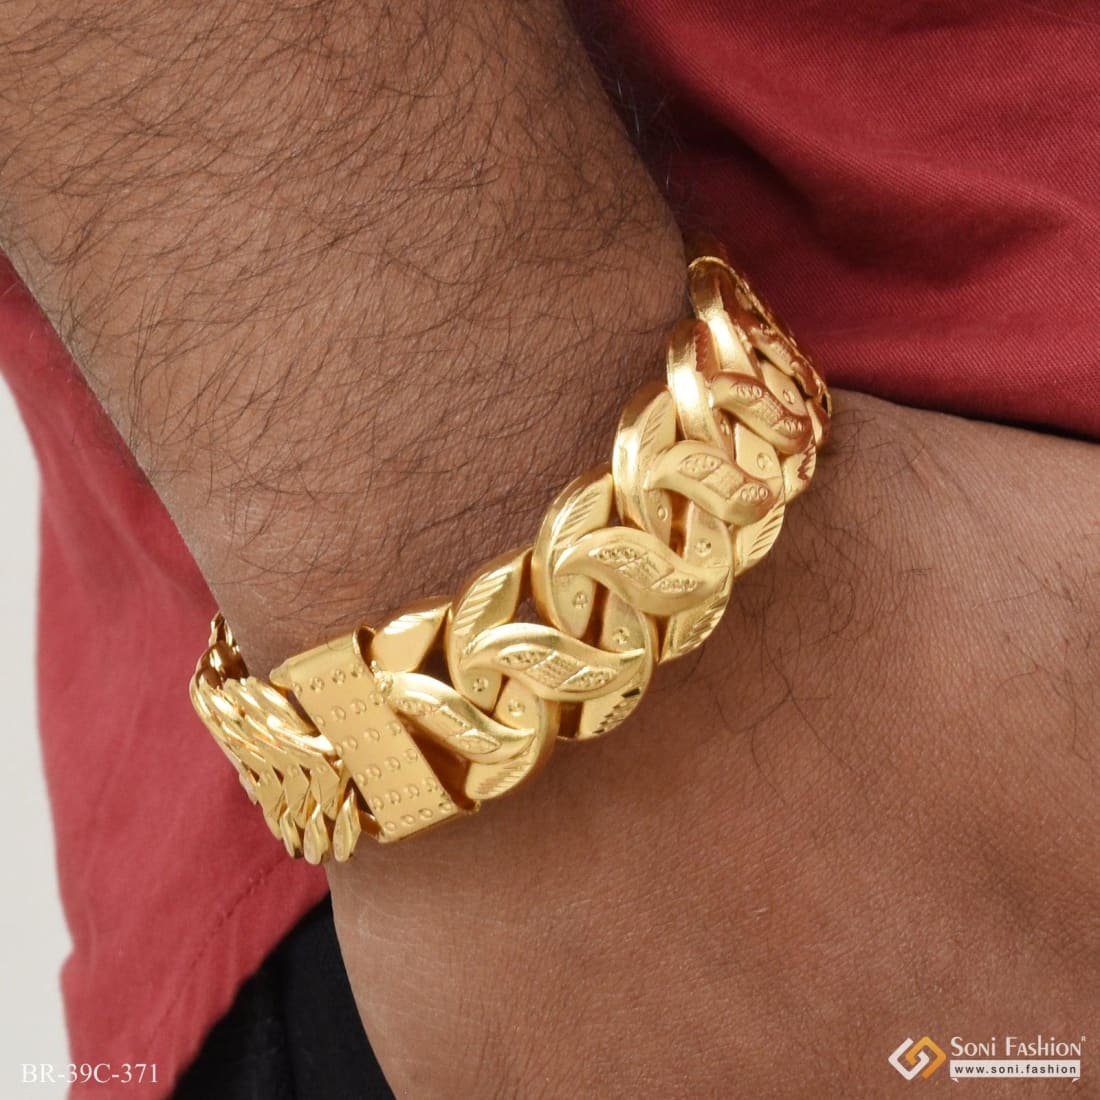 100% Real Gold 24K Gold Gold 9 12mm Mens Bracelet With Curb Chain Link Gold,  Not Money From Wwwabcdefg886, $7.11 | DHgate.Com